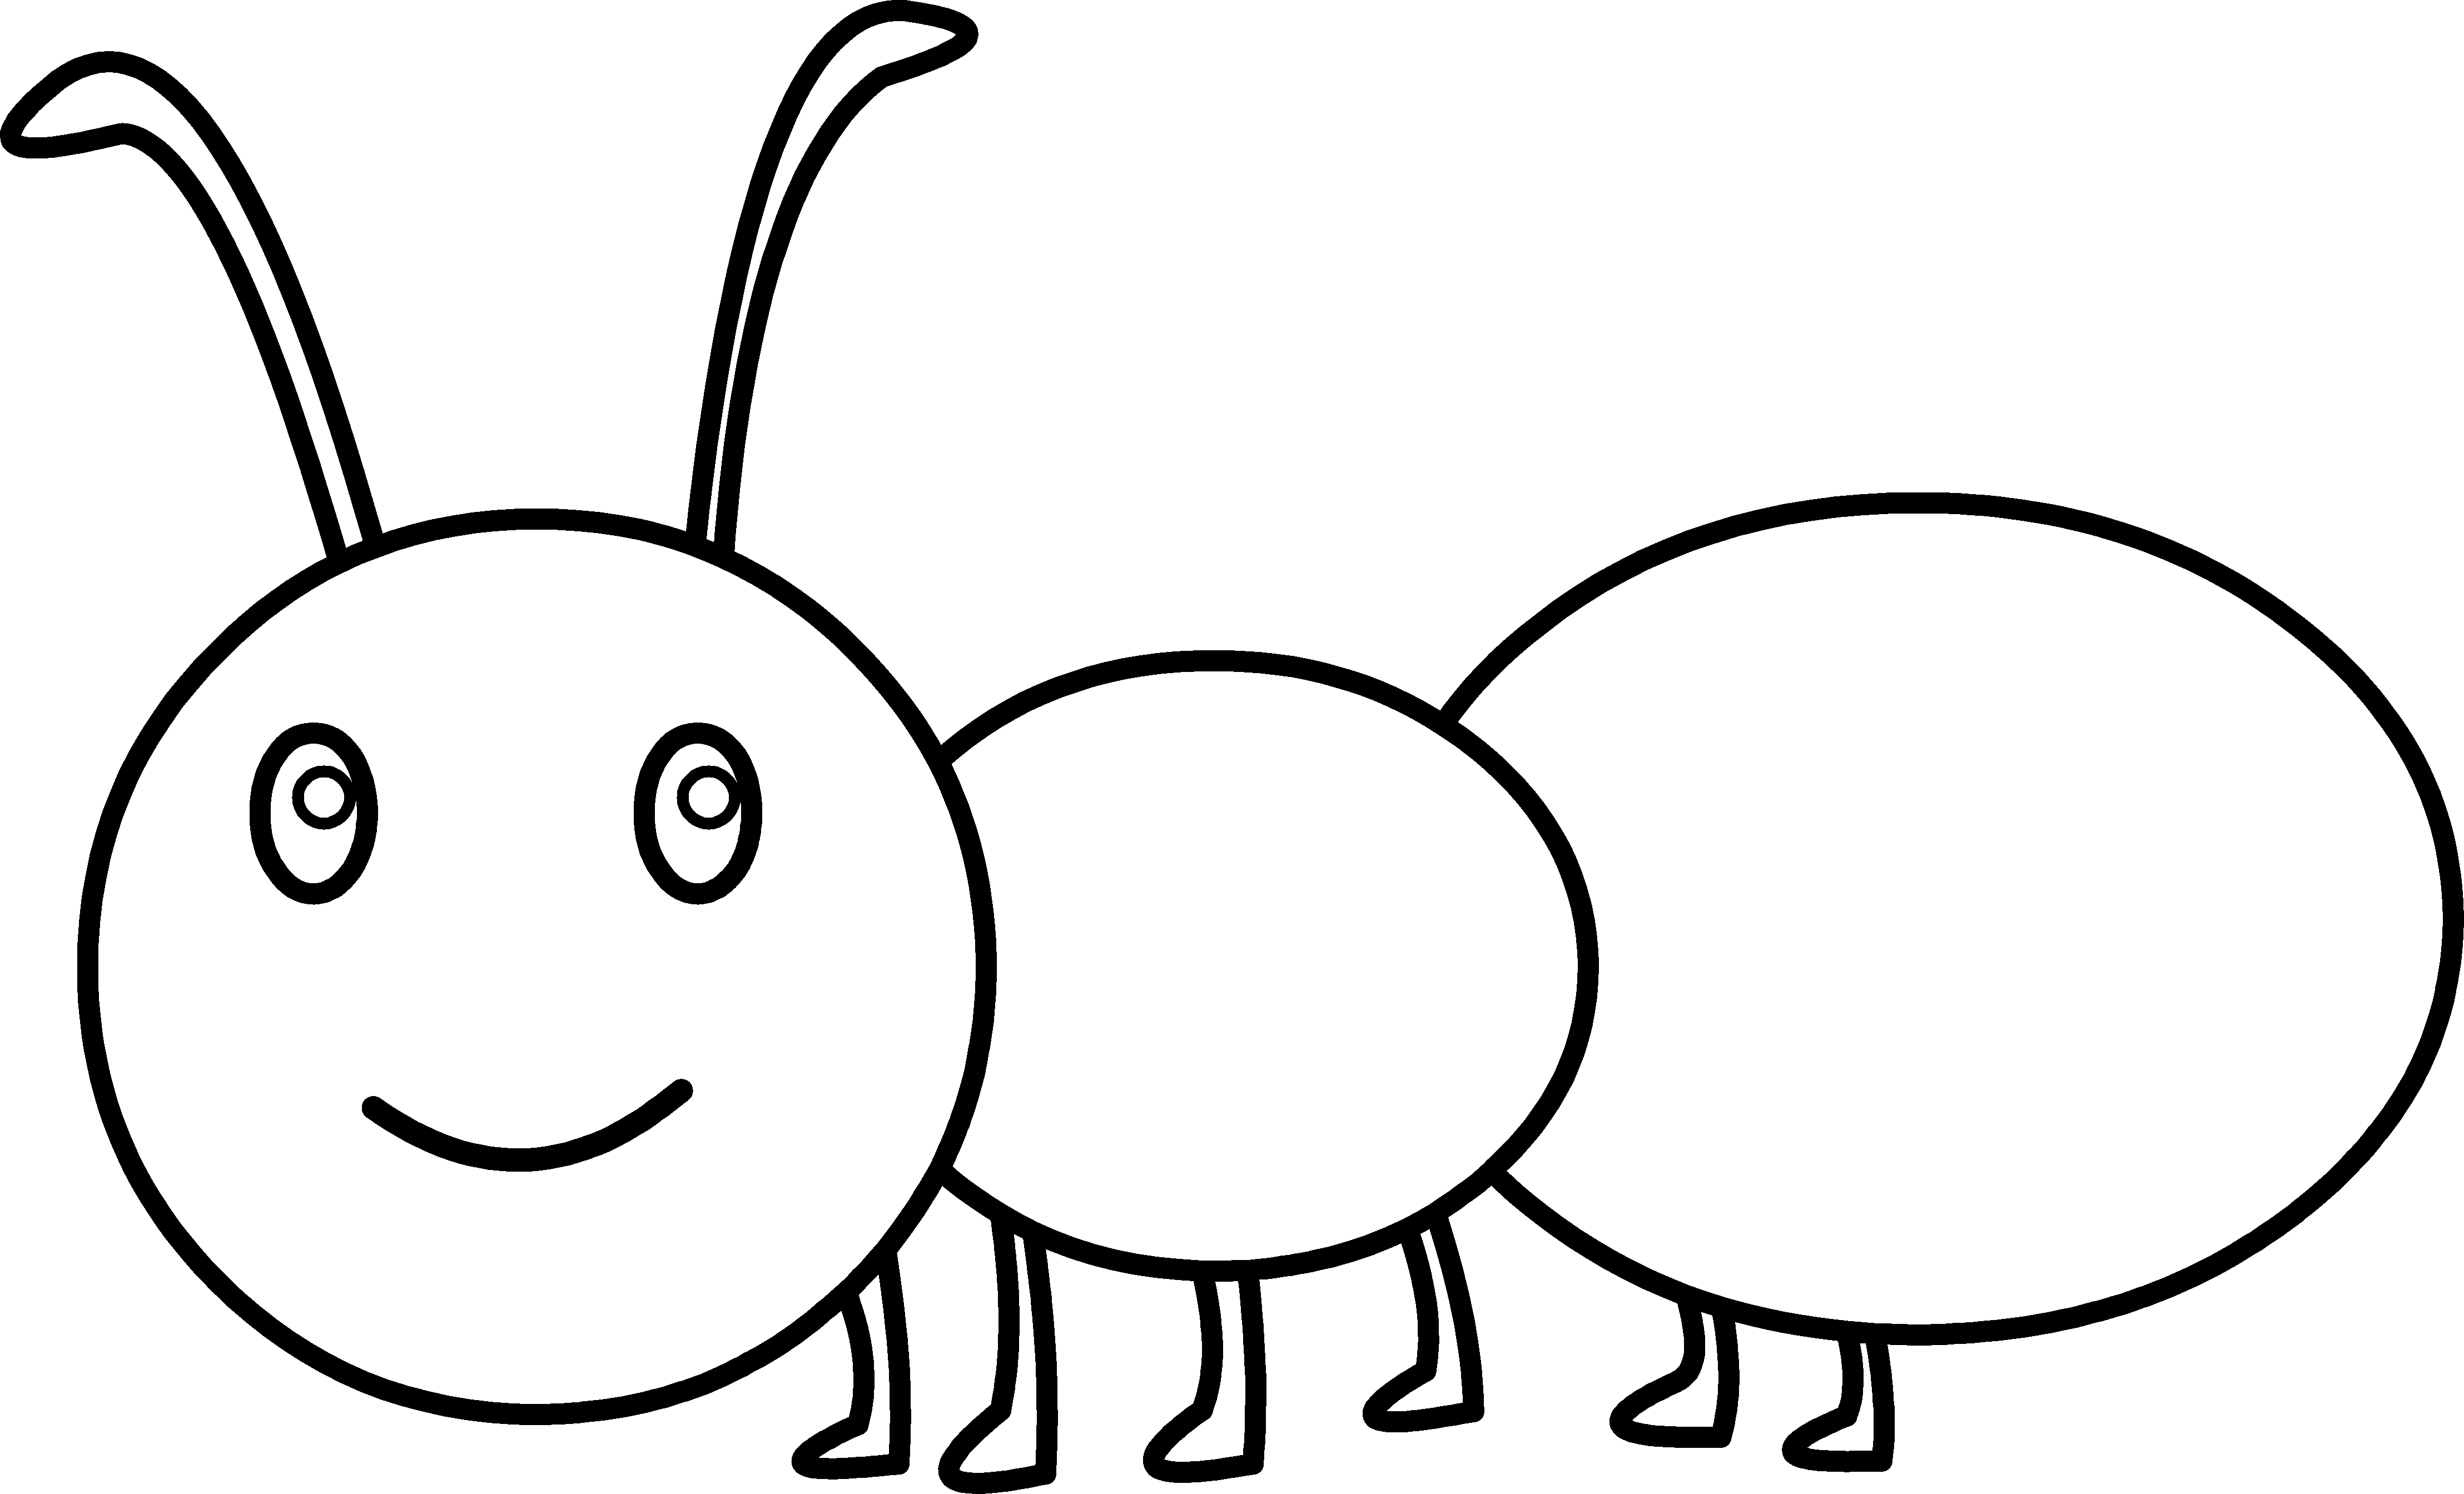 Ant  black and white ant clipart black and white free images clipartbarn